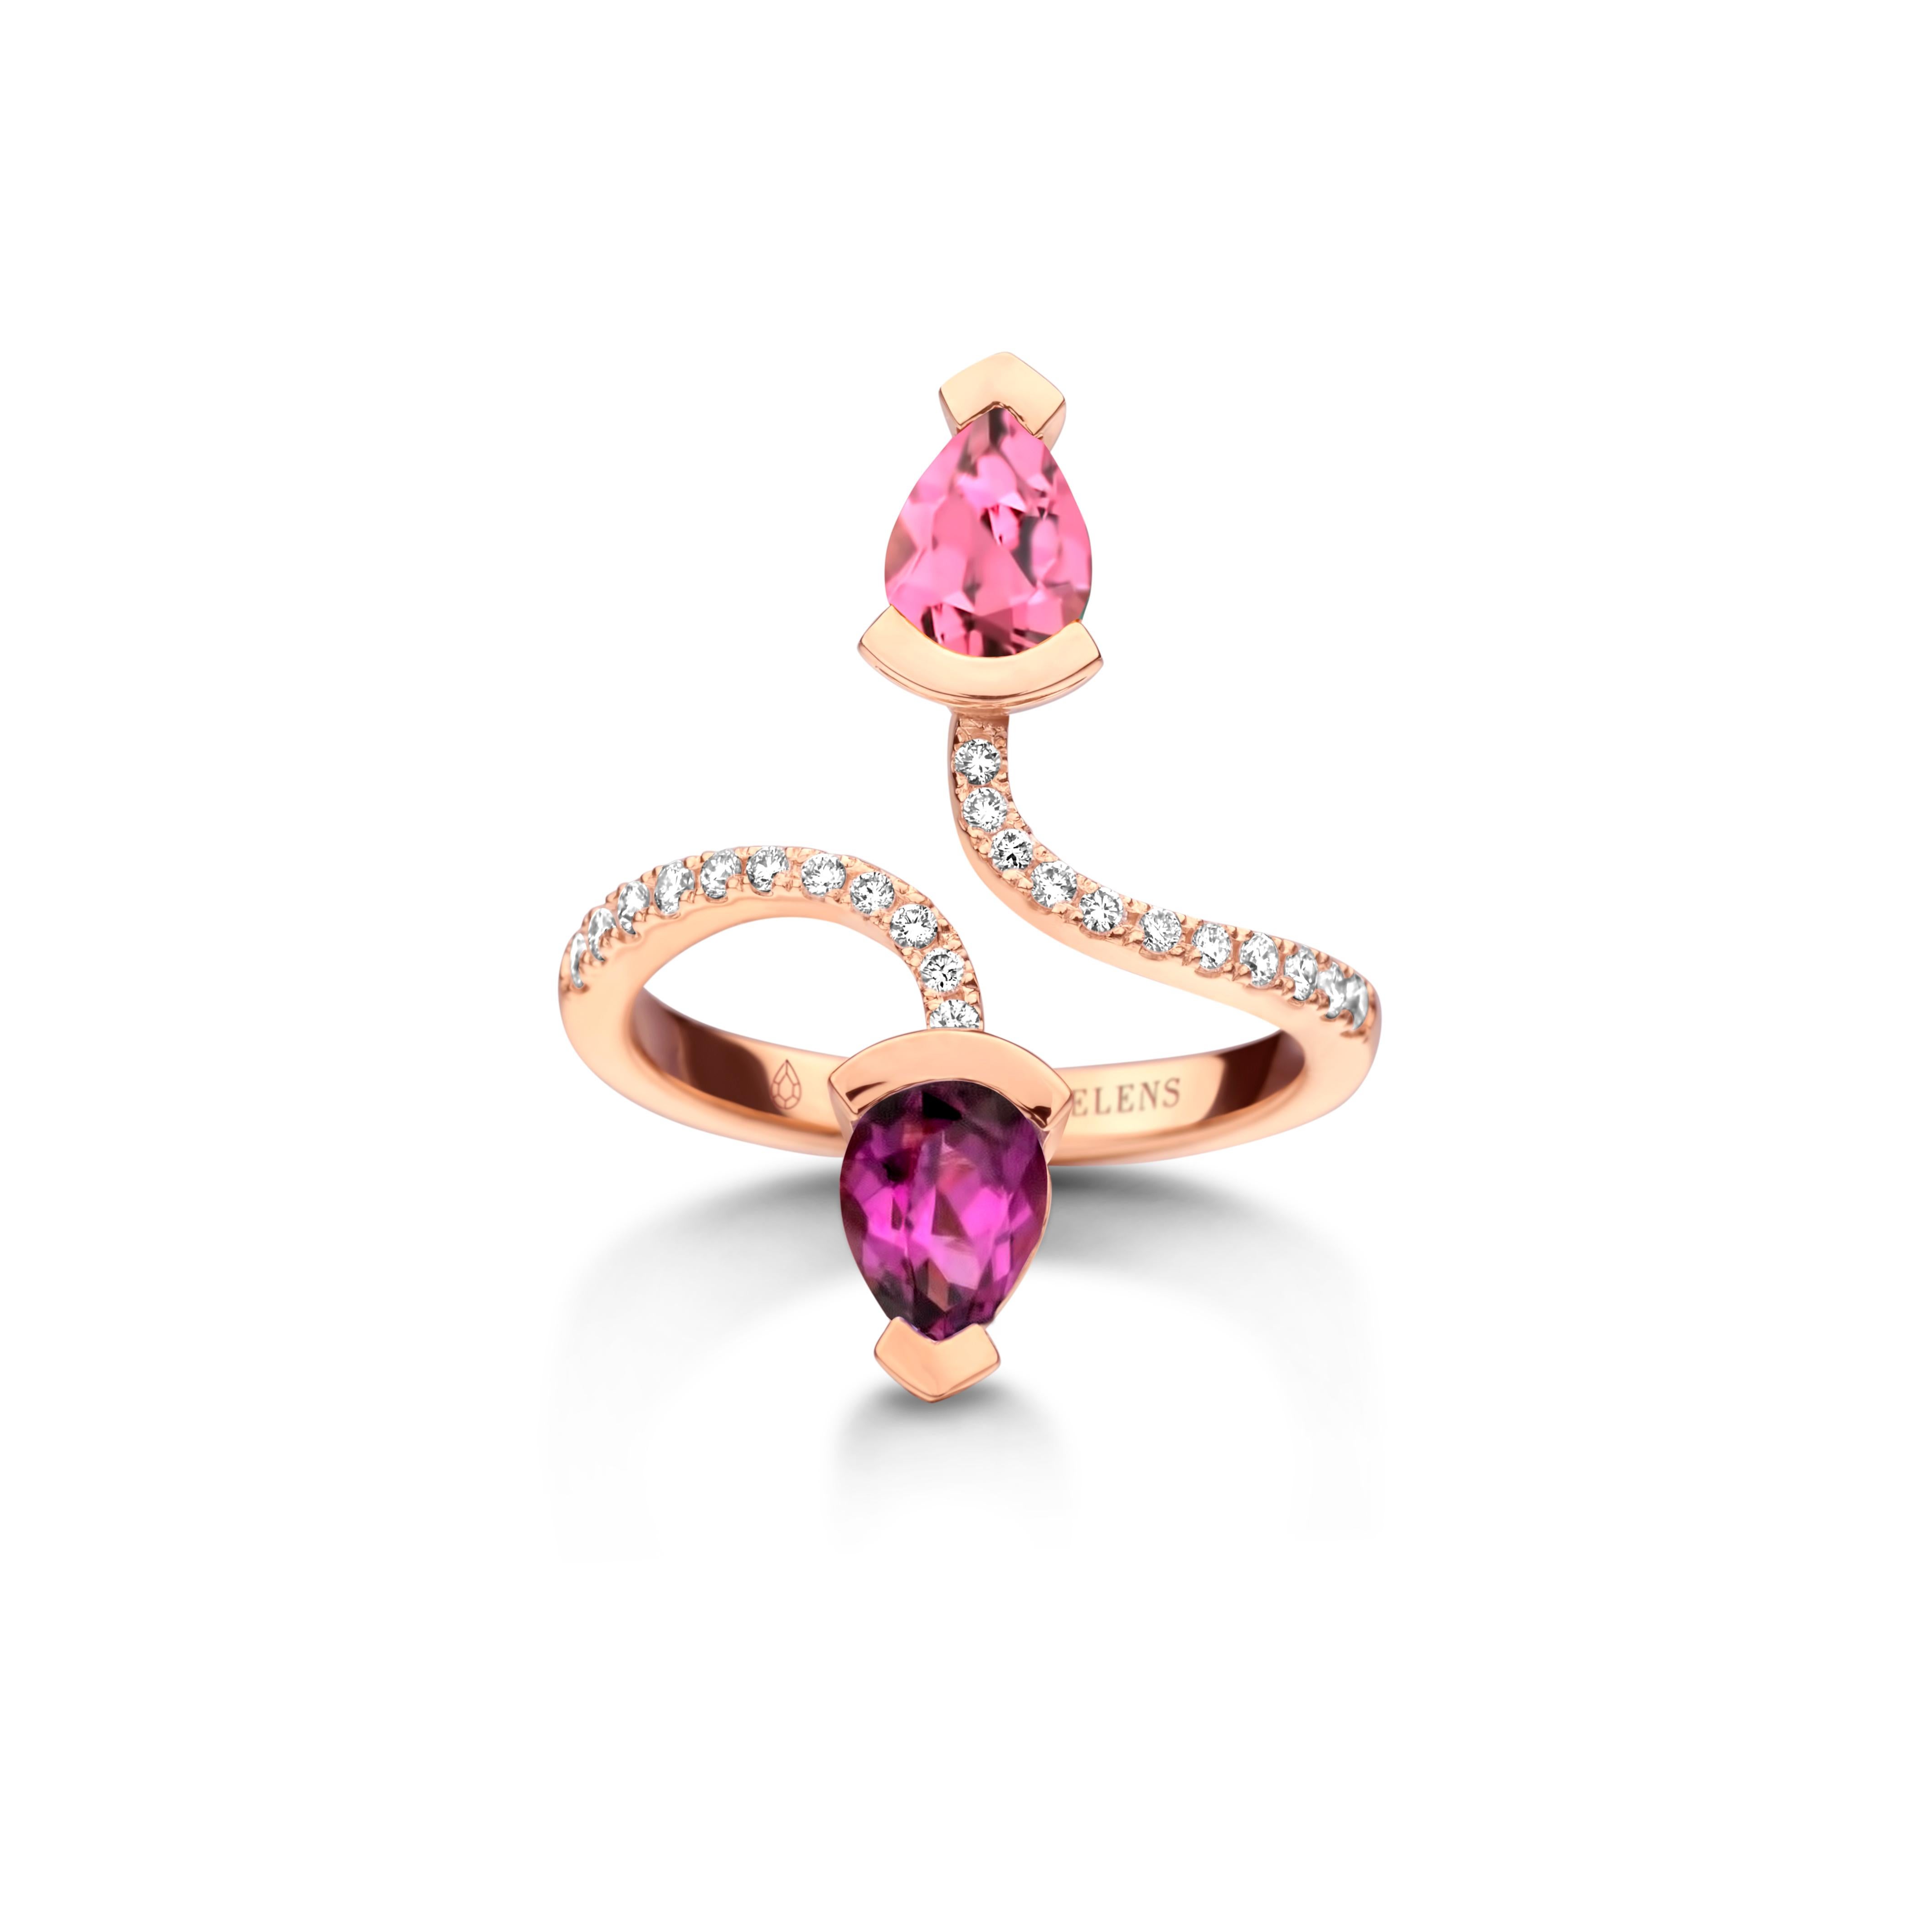 Adeline Duo ring in 18Kt yellow gold 5g set with a pear-shaped pink tourmaline 0,70 Ct, a pear-shaped royal purple garnet 0,70 Ct and 0,19 Ct of white brilliant cut diamonds - VS F quality. Celine Roelens, a goldsmith and gemologist, is specialized